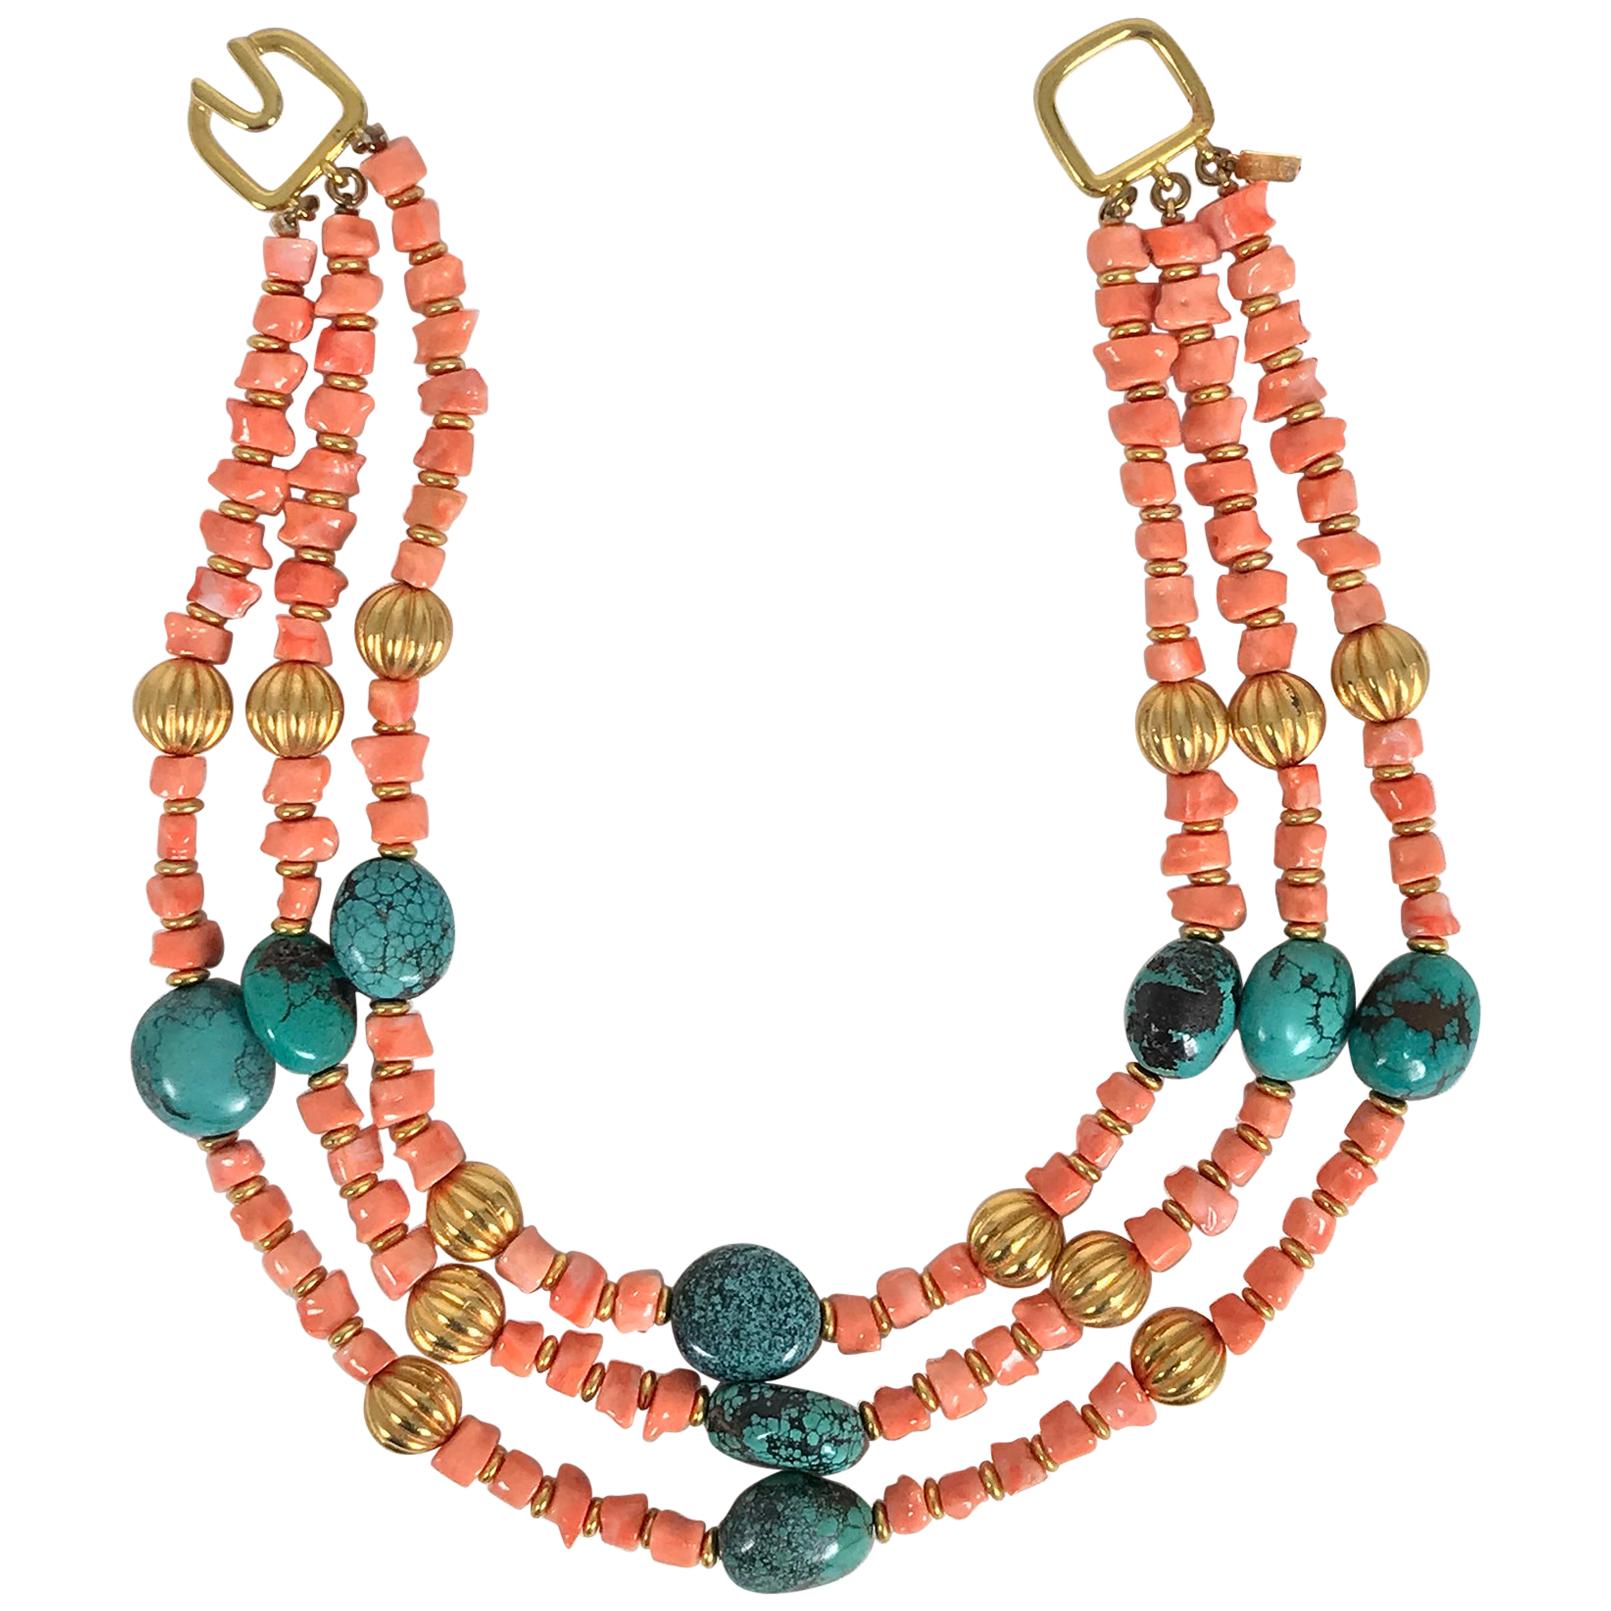 Kenneth Lane Faux Coral and Turquoise Triple Strand Necklace 